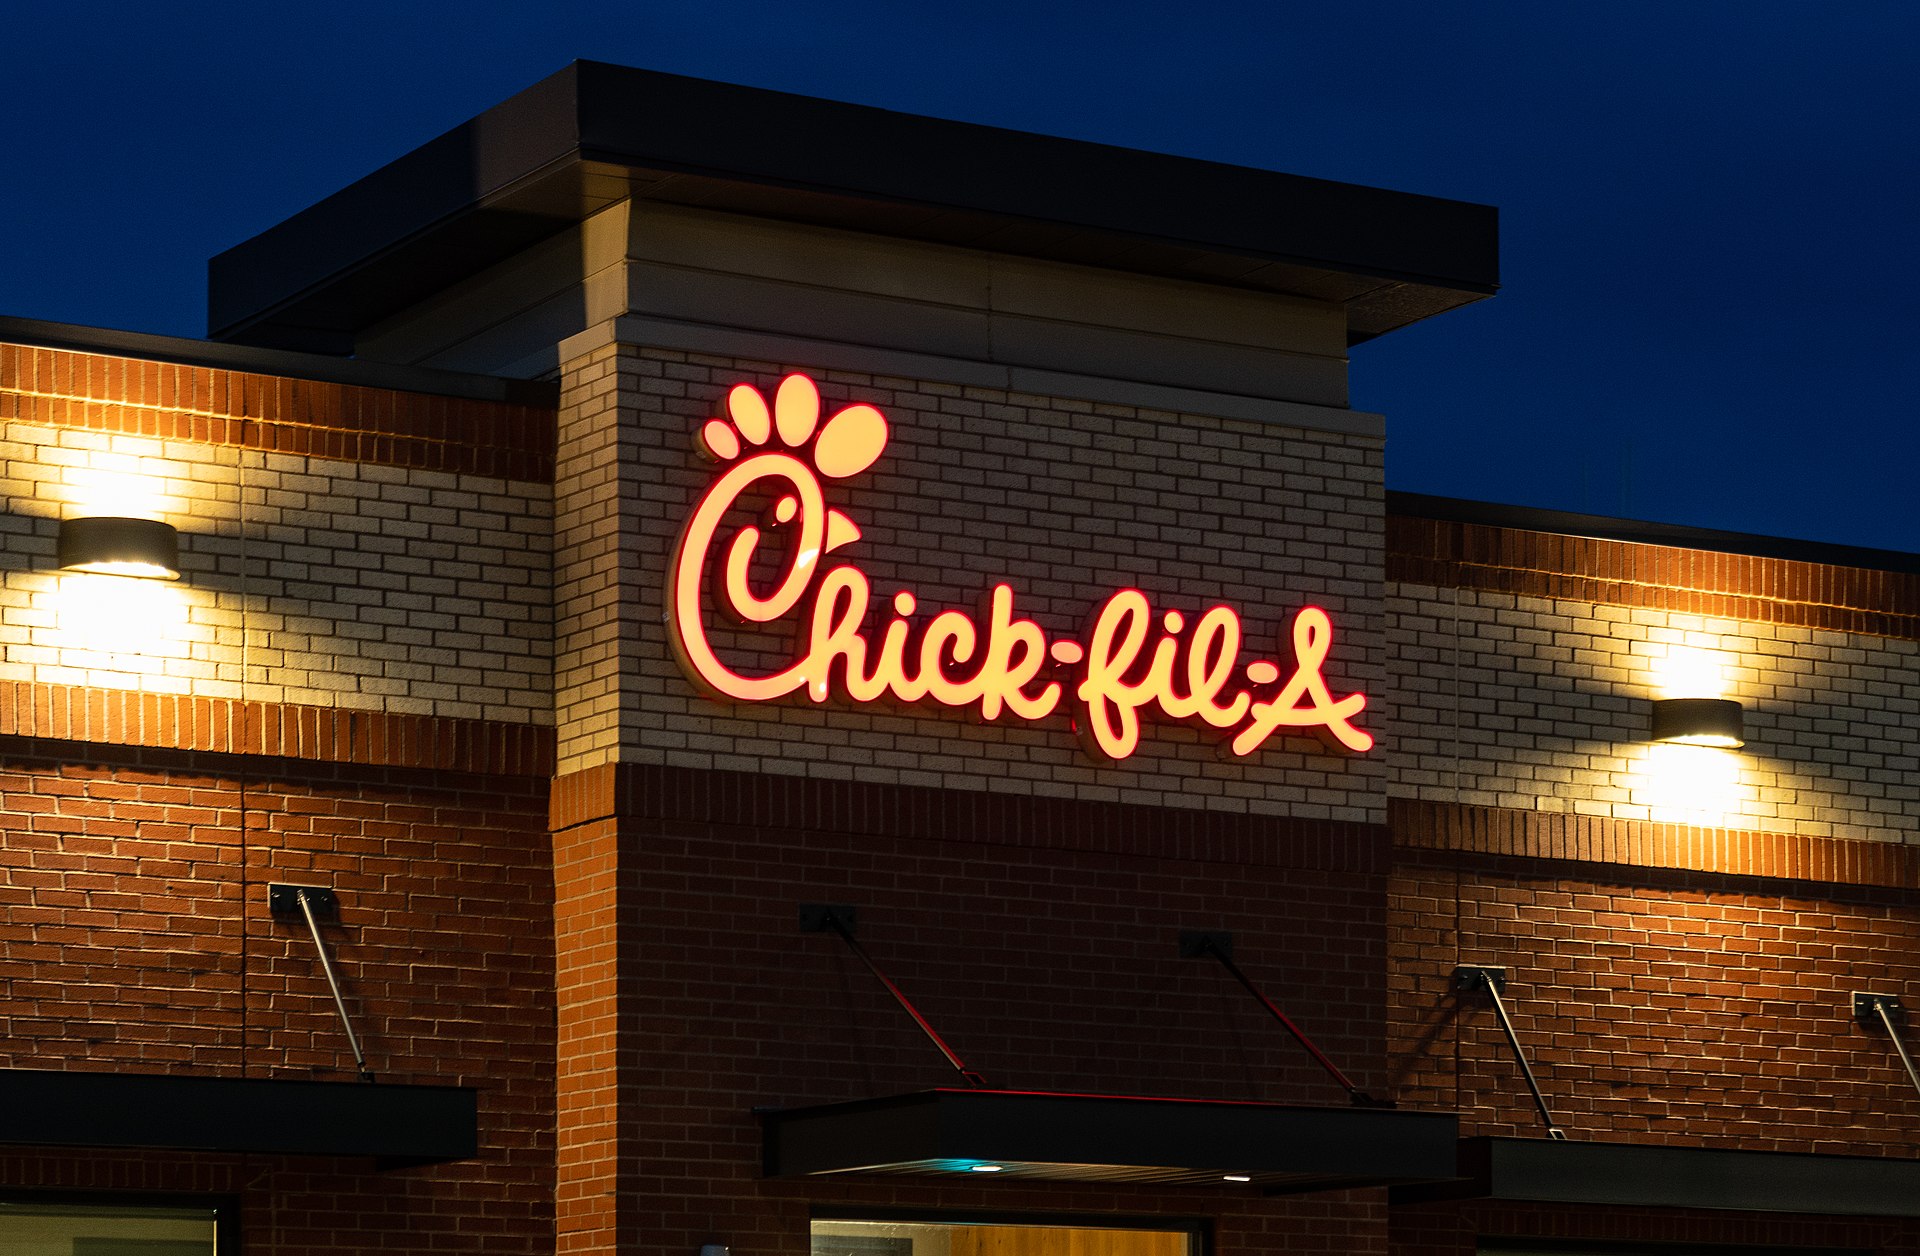 Chick-fil-a-ghost-kitchen-set-to-open-its-doors-in-college-park-on-september-14